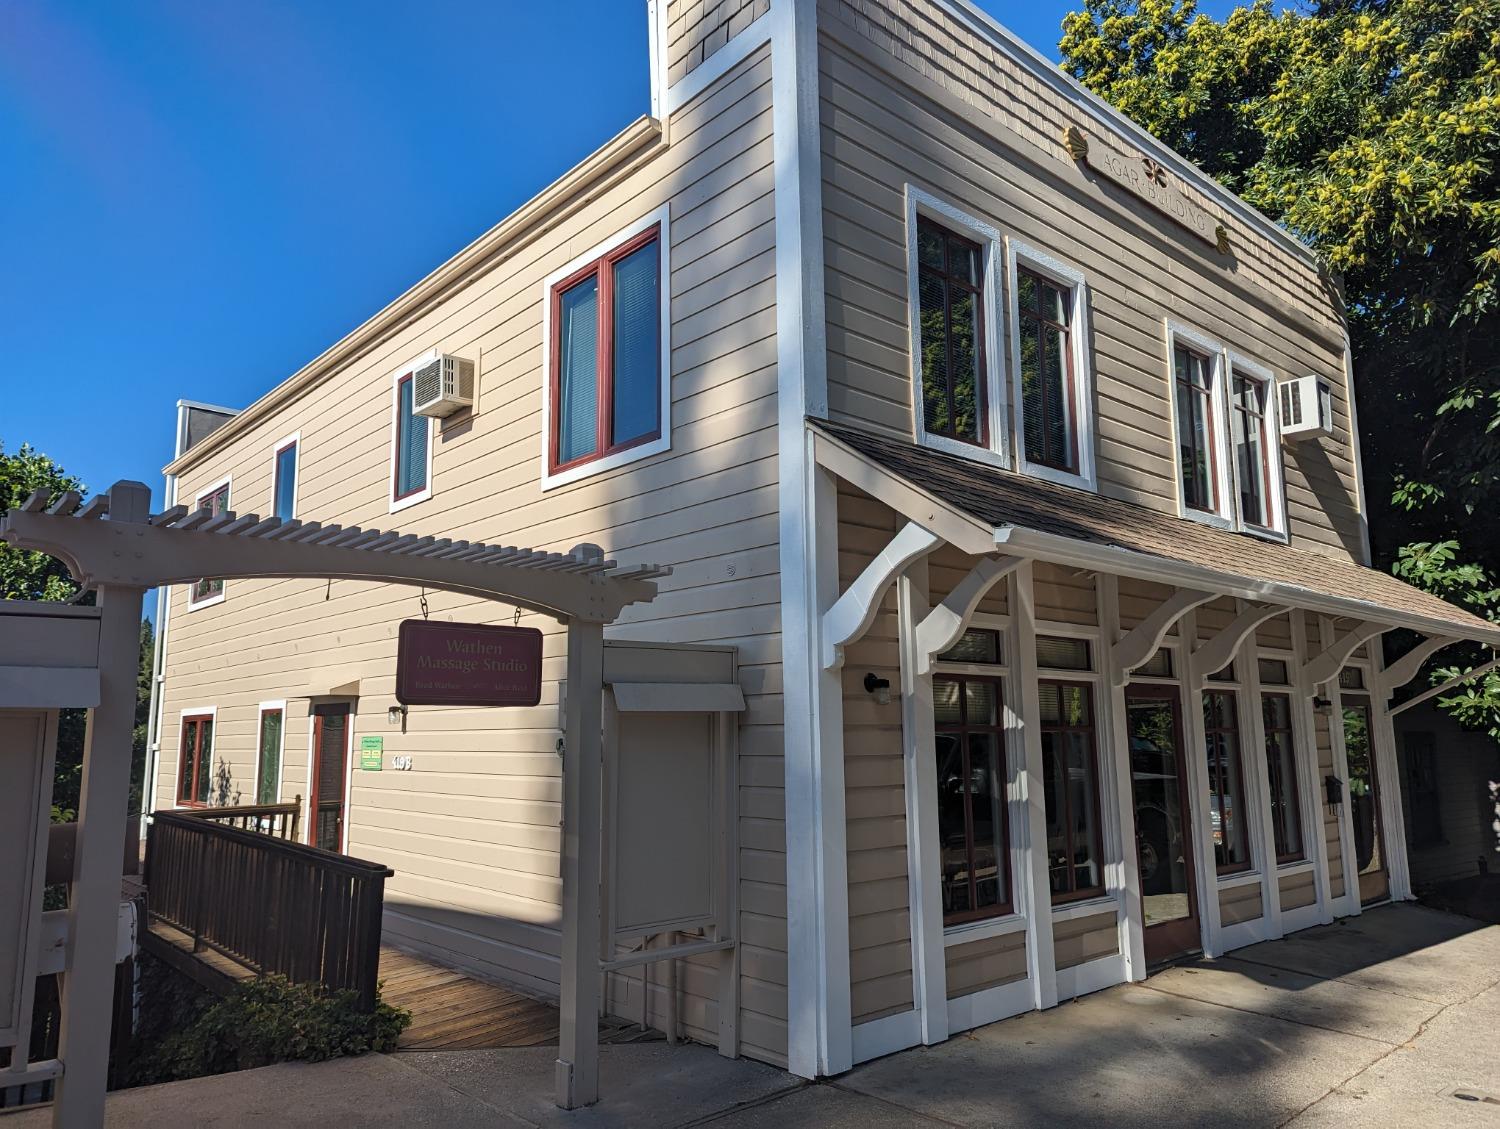 Photo of 419 Spring St in Nevada City, CA